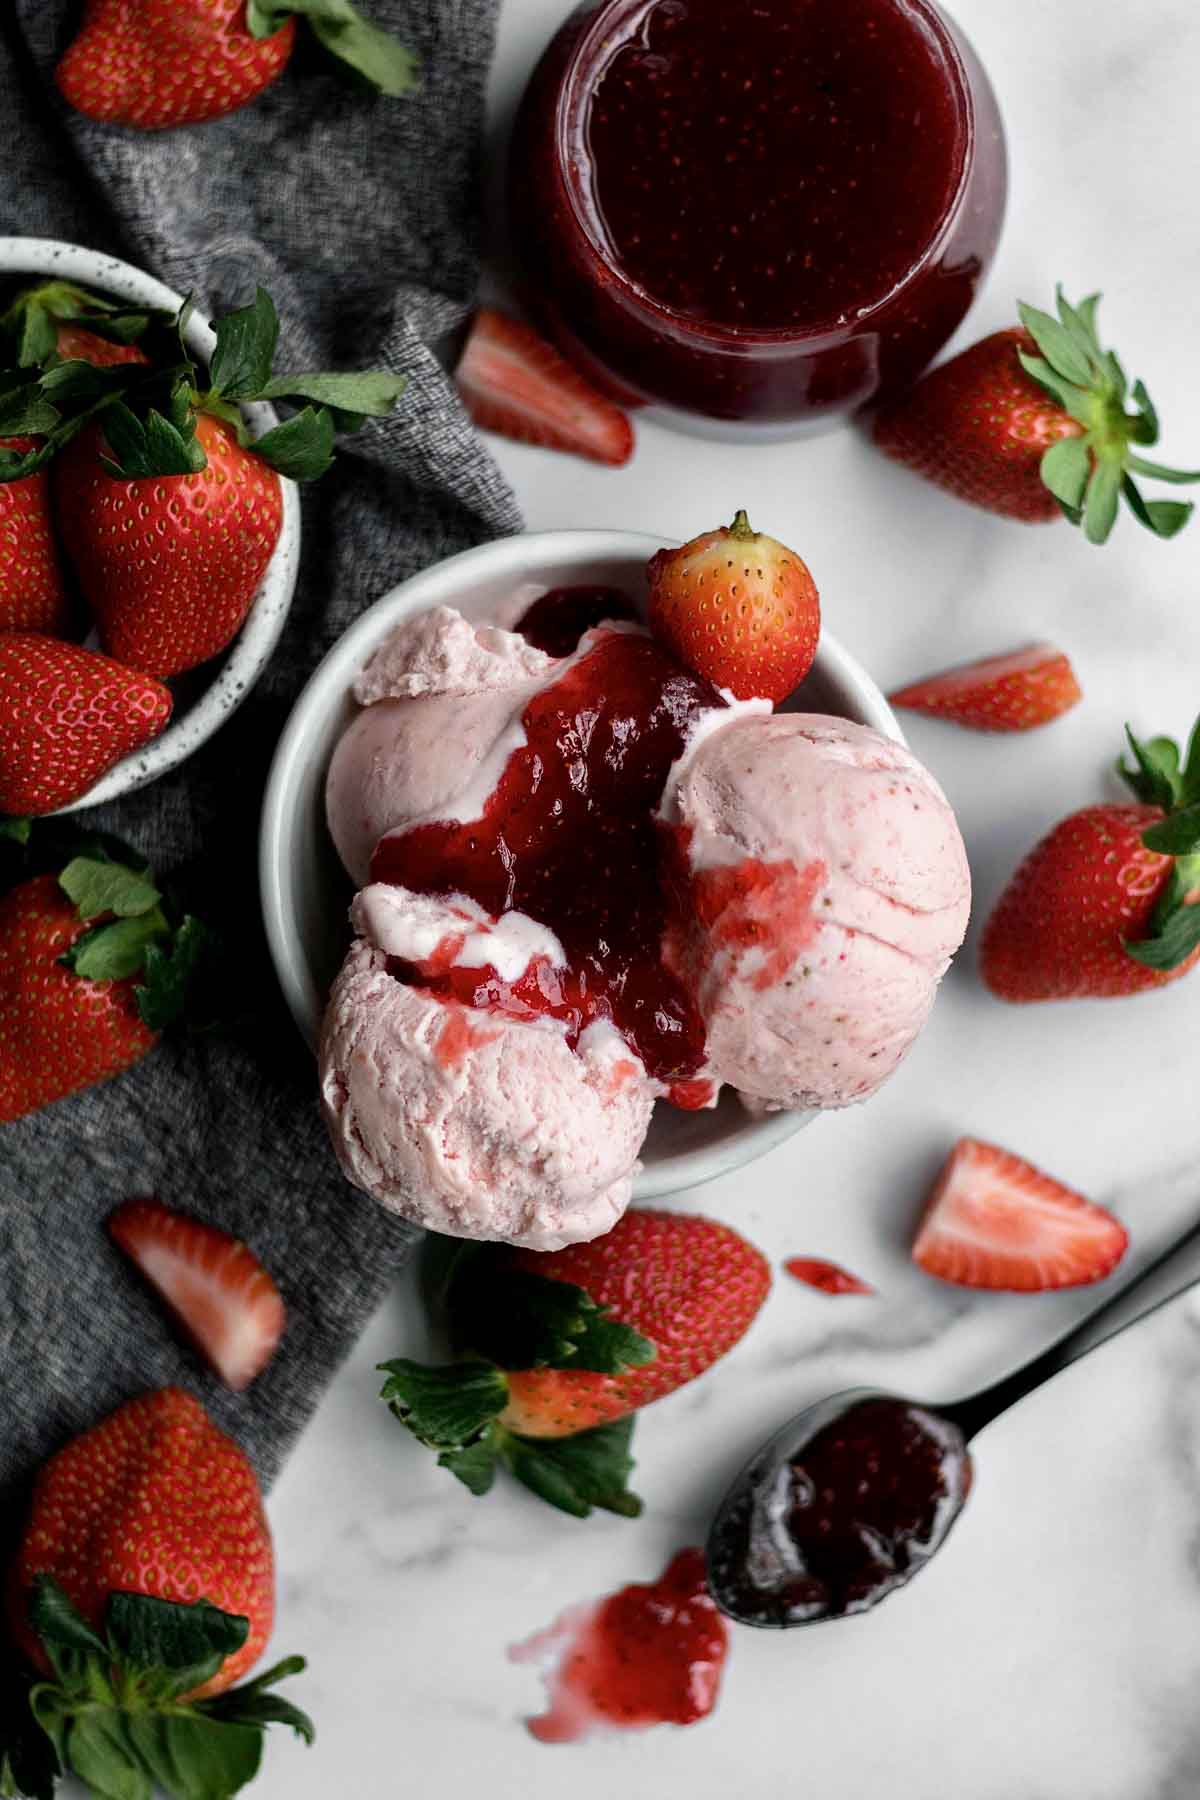 A bowl of Strawberry Ice Cream sits with chopped strawberries strewn on the table with a ramekin of Strawberry Sauce eyeing the scene.